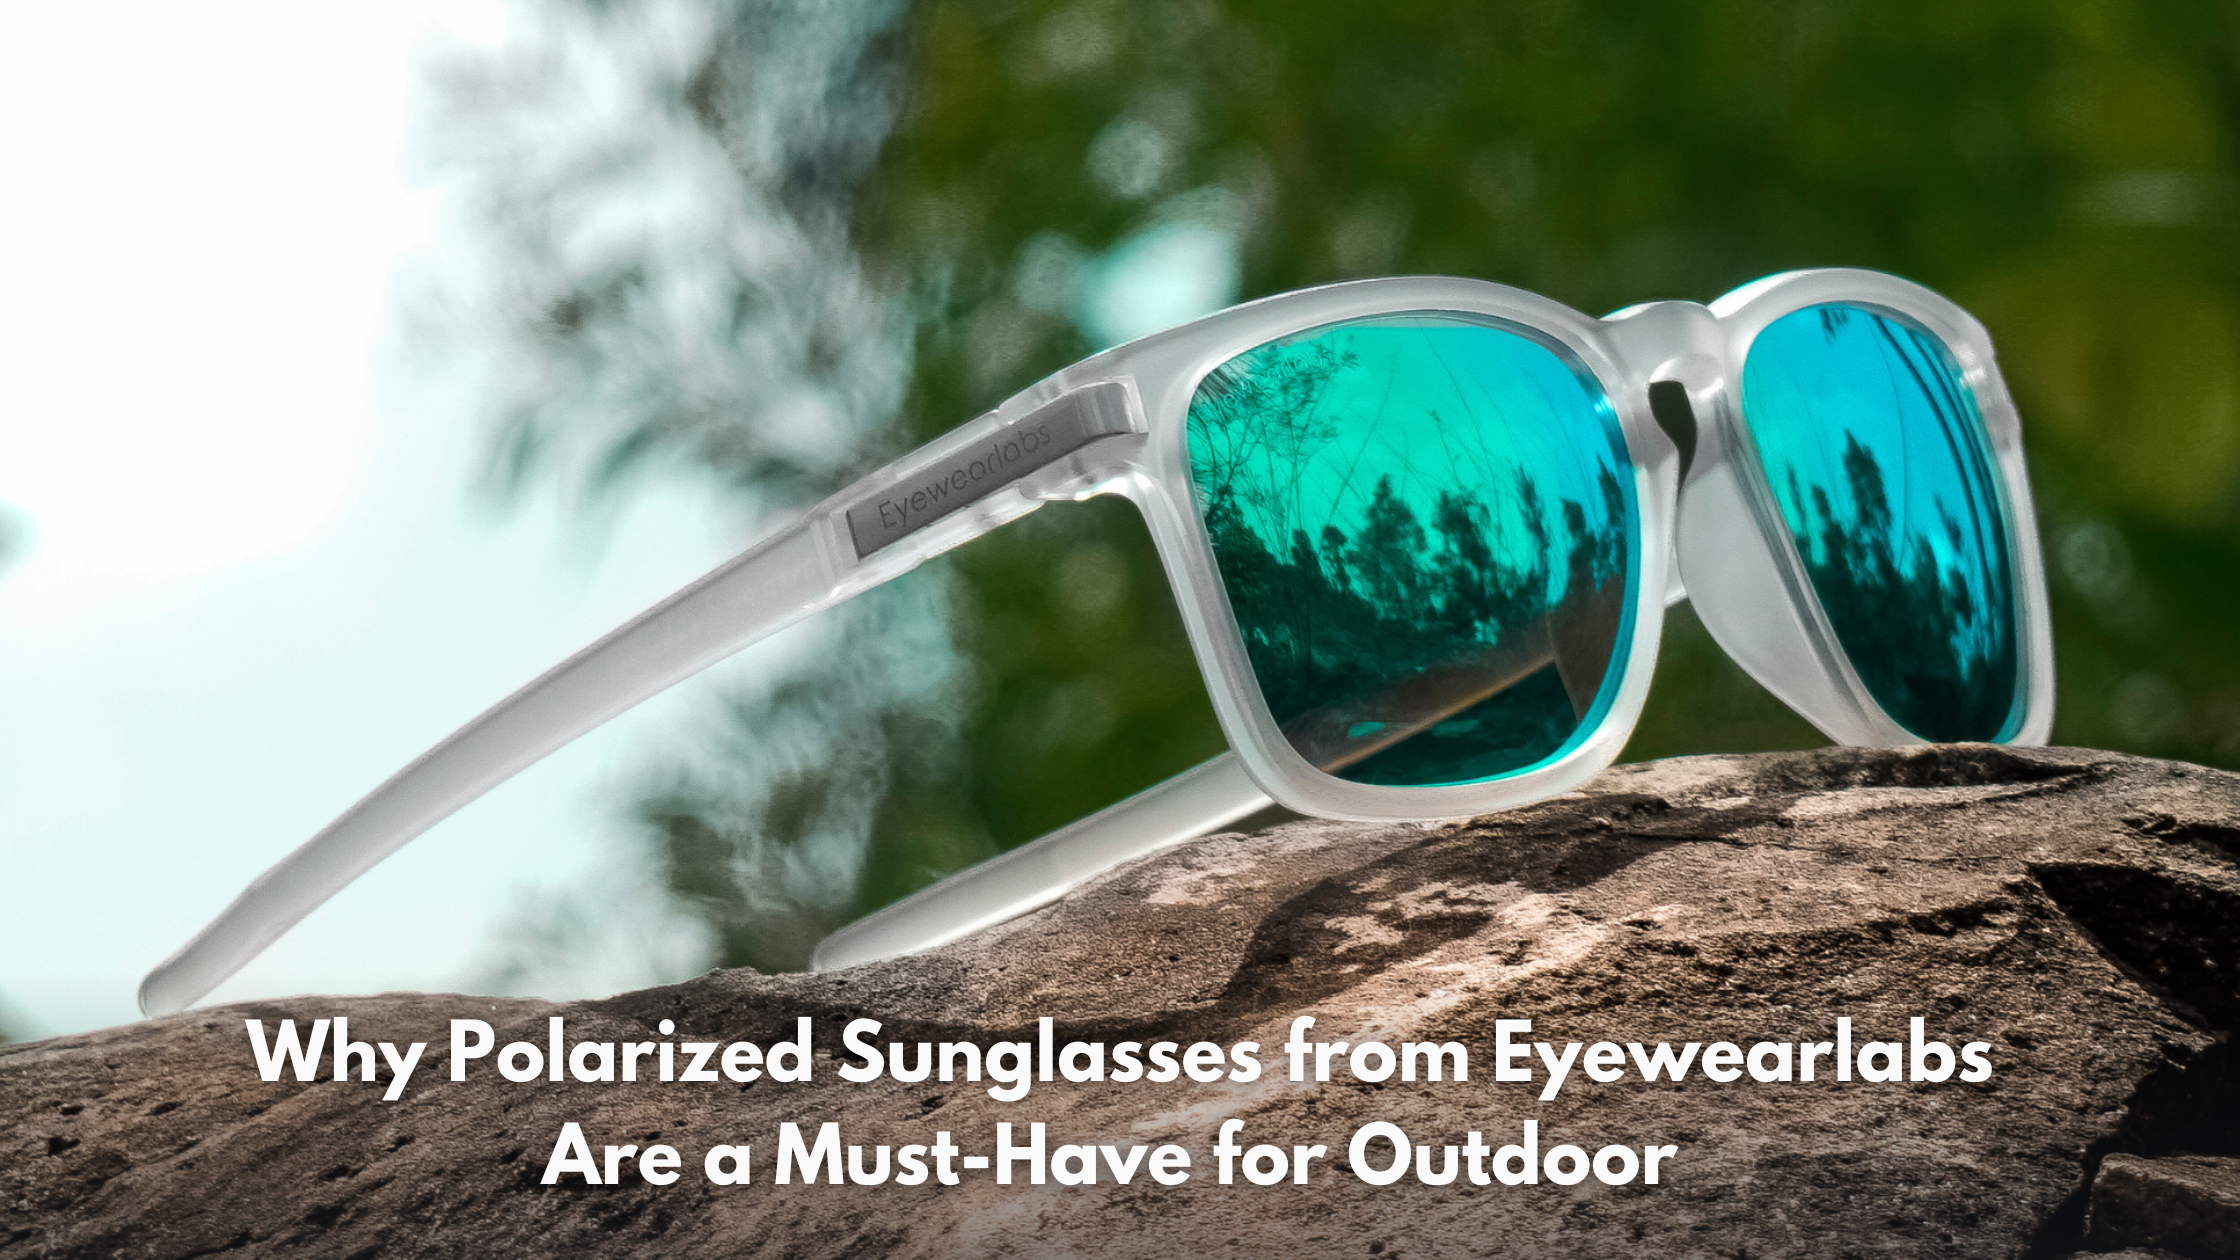 Why Polarized Sunglasses from Eyewearlabs Are a Must-Have for Outdoor